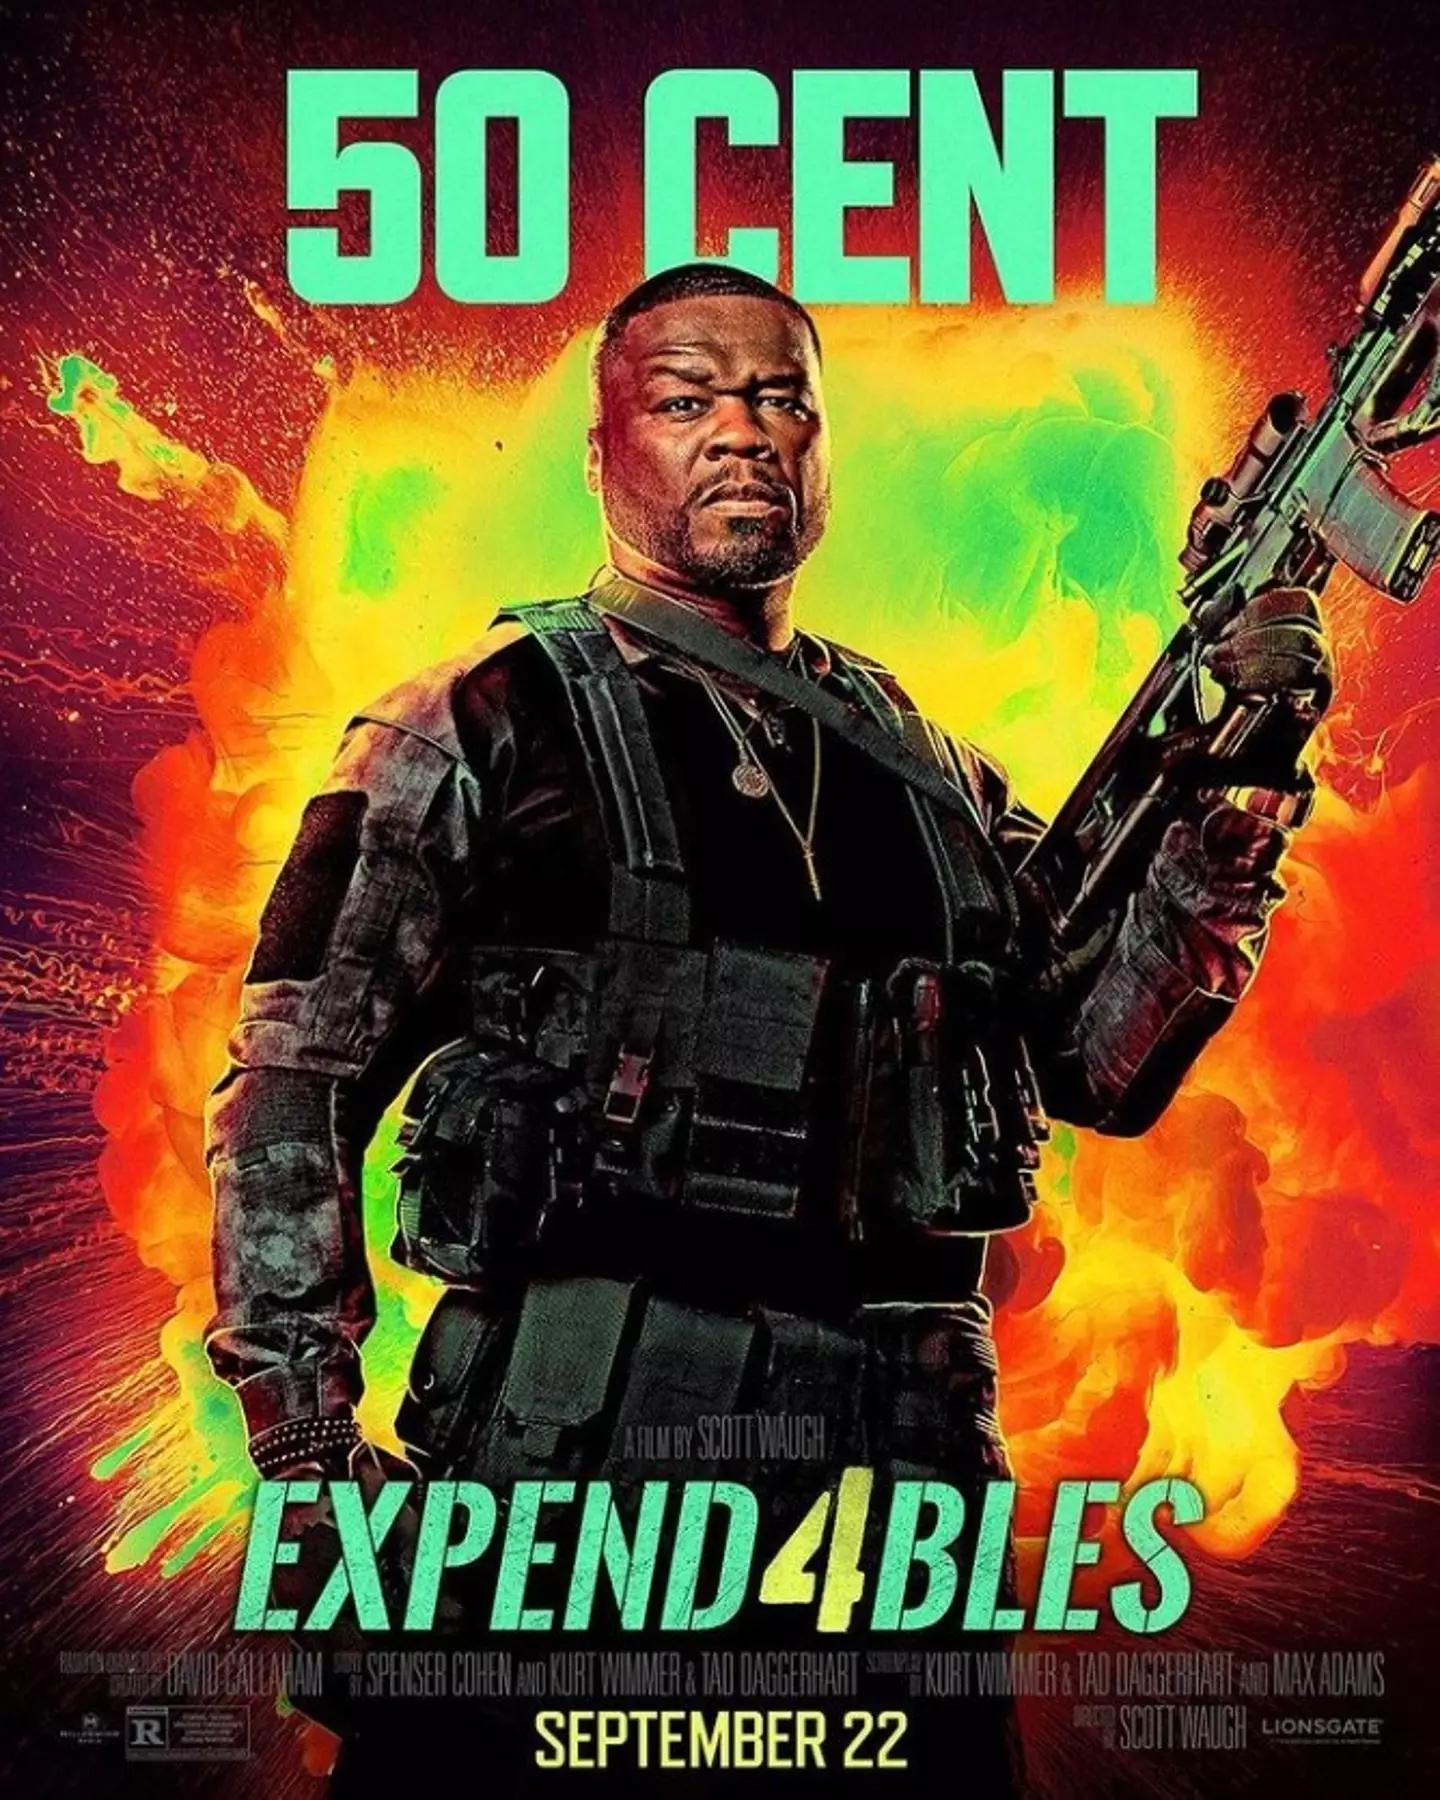 50 Cent was not happy with his Expendables 4 poster.